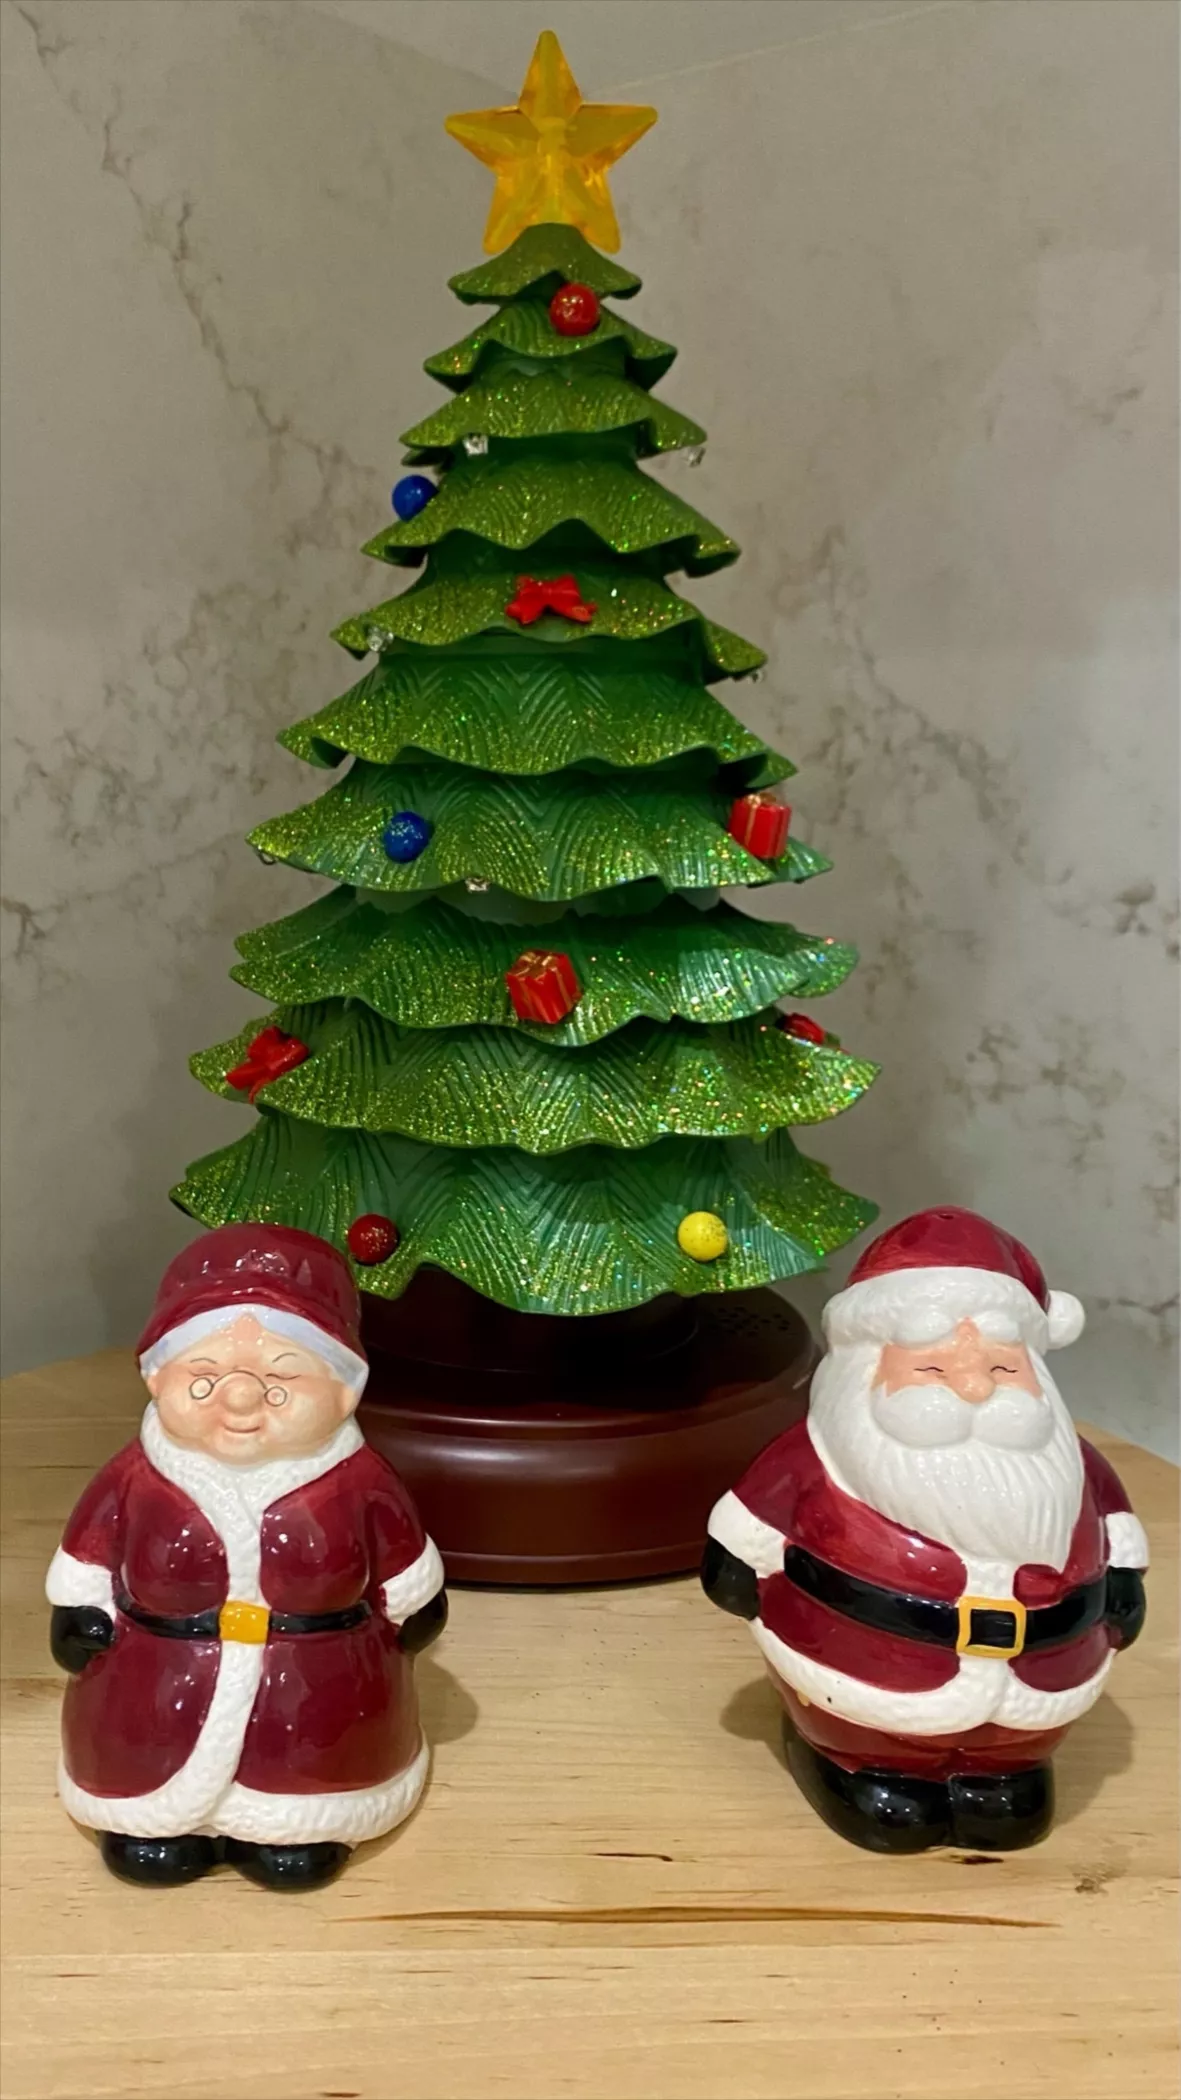 ceramic santa house products for sale